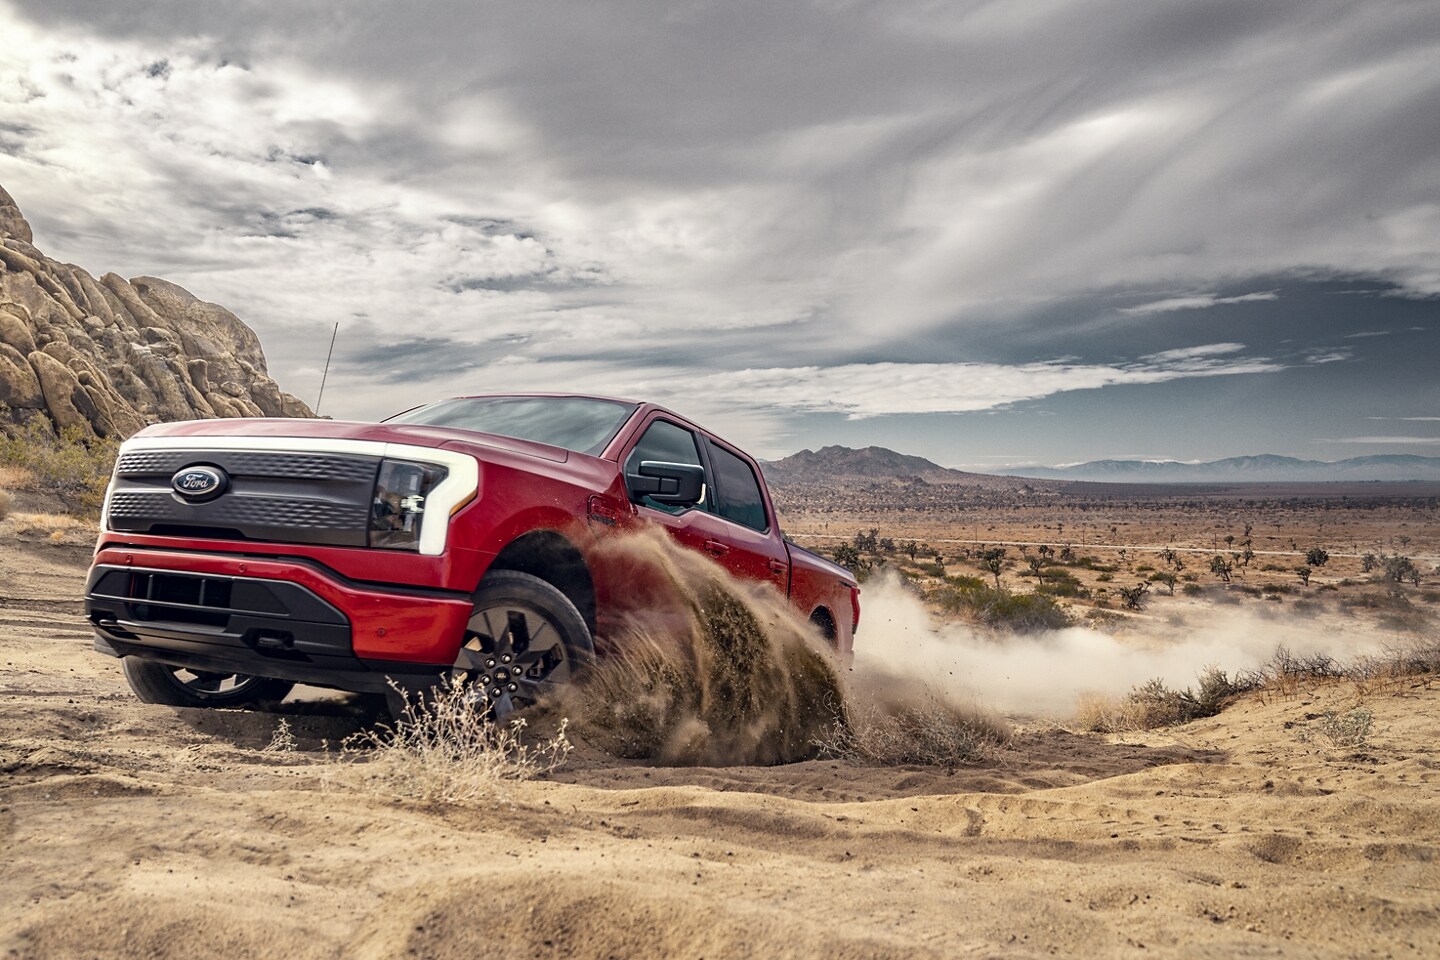 A red Ford F-150 Lightning